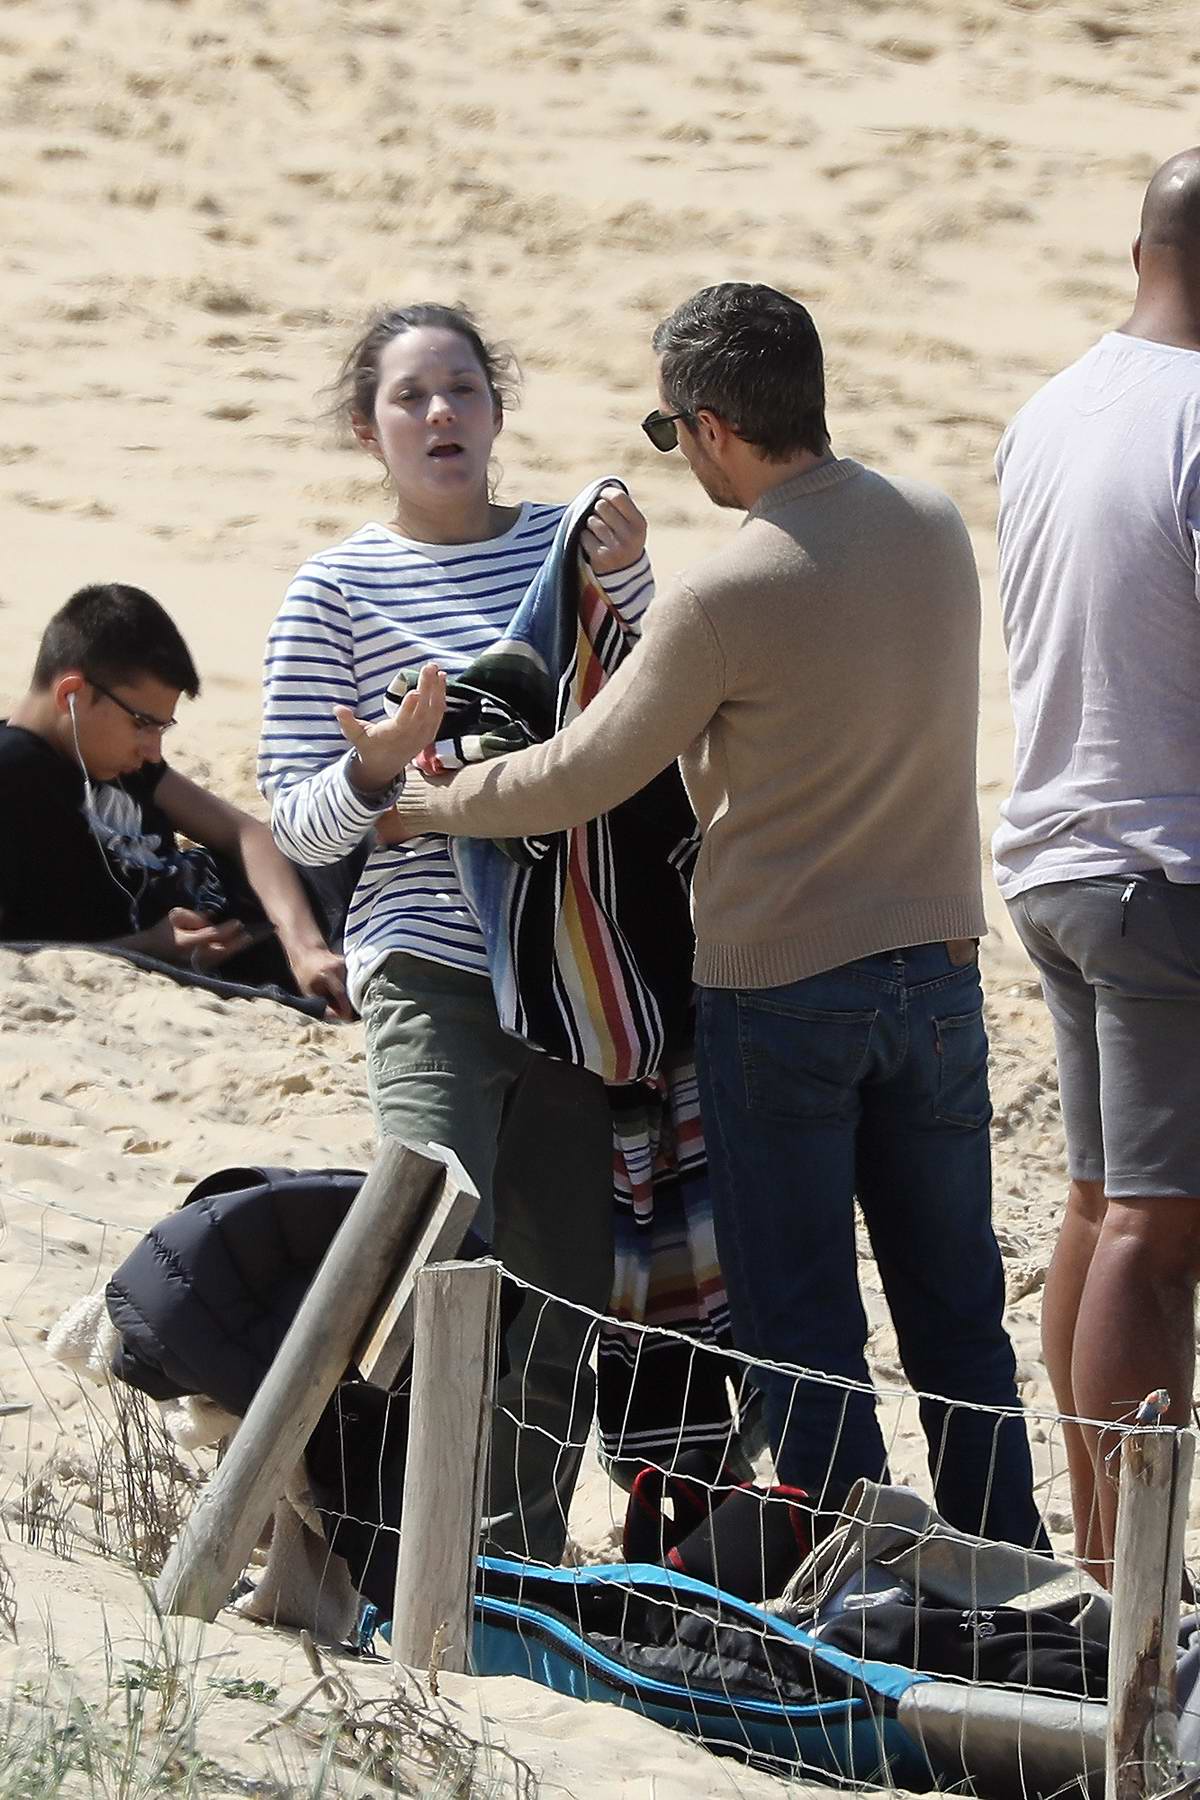 Marion Cotillard Gets Help From Husband Guillaume Canet To Put On A Wetsuit As She Hits The Wave